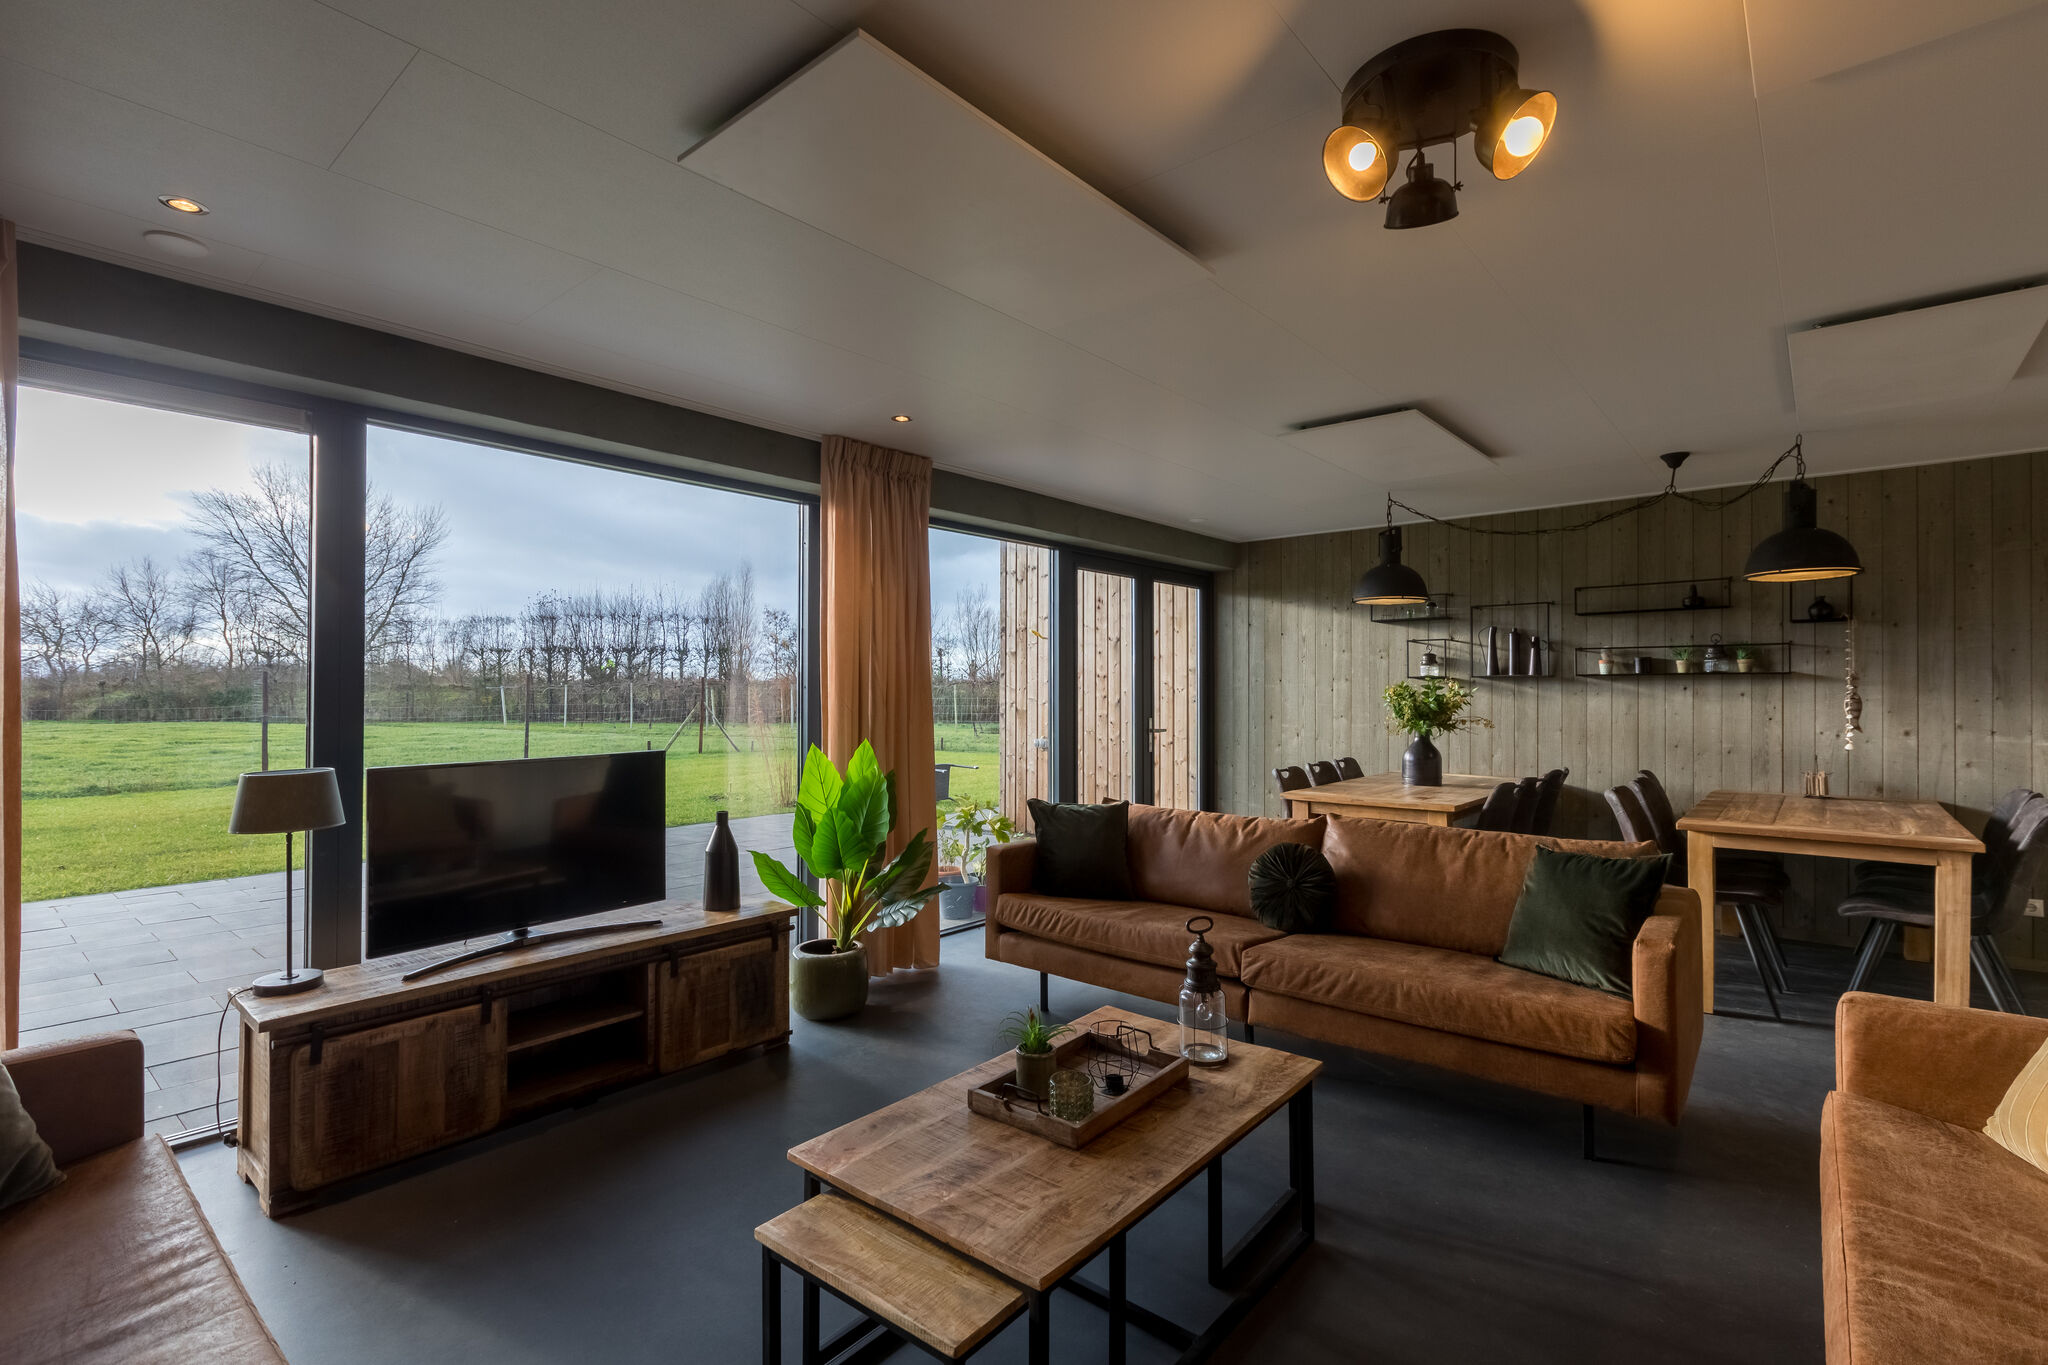 Holiday home in Vrouwenpolder near beach